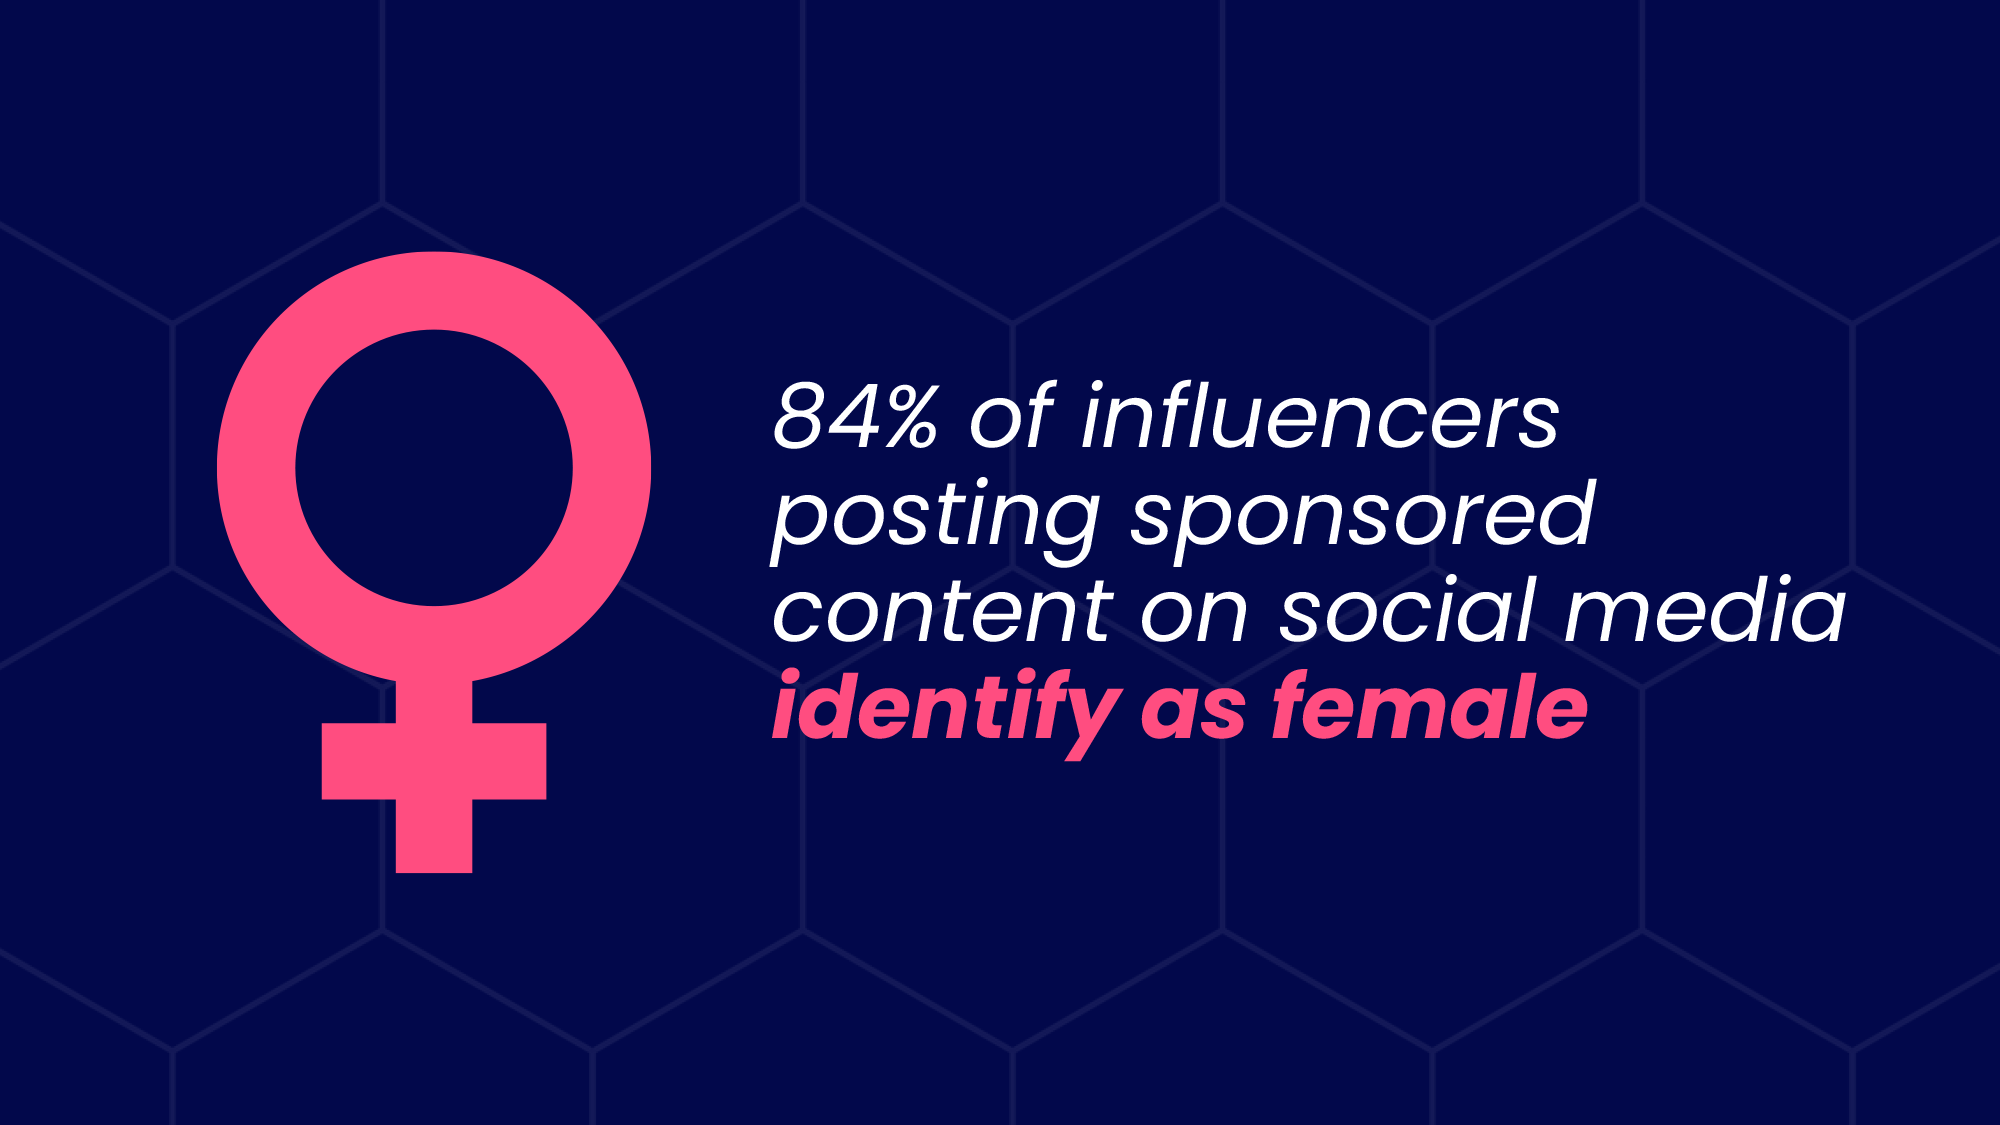 84% of influencers posting sponsored content on social media identify as female